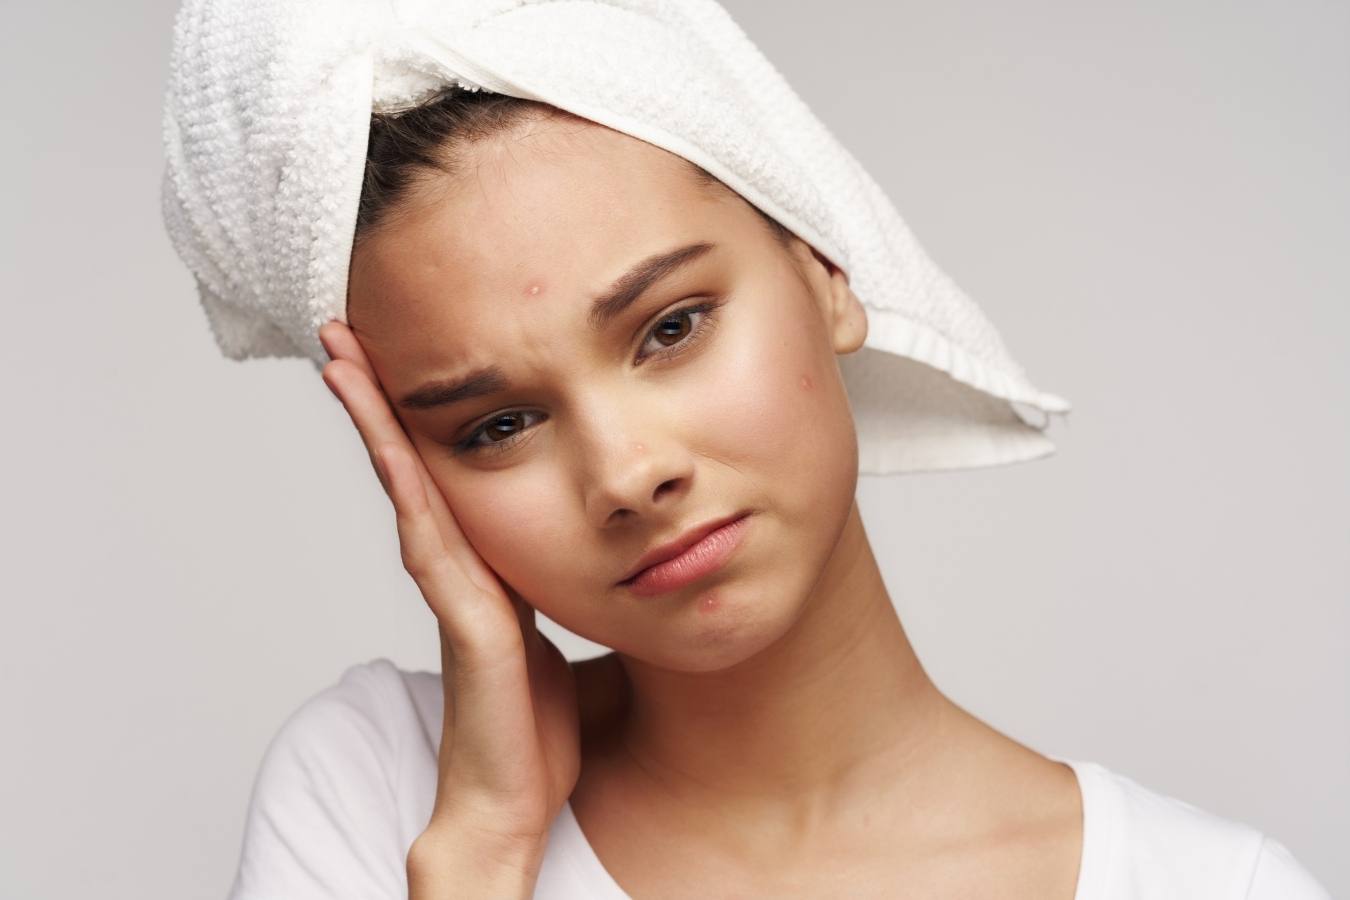 How To Prevent Breakouts After Waxing Eyebrows